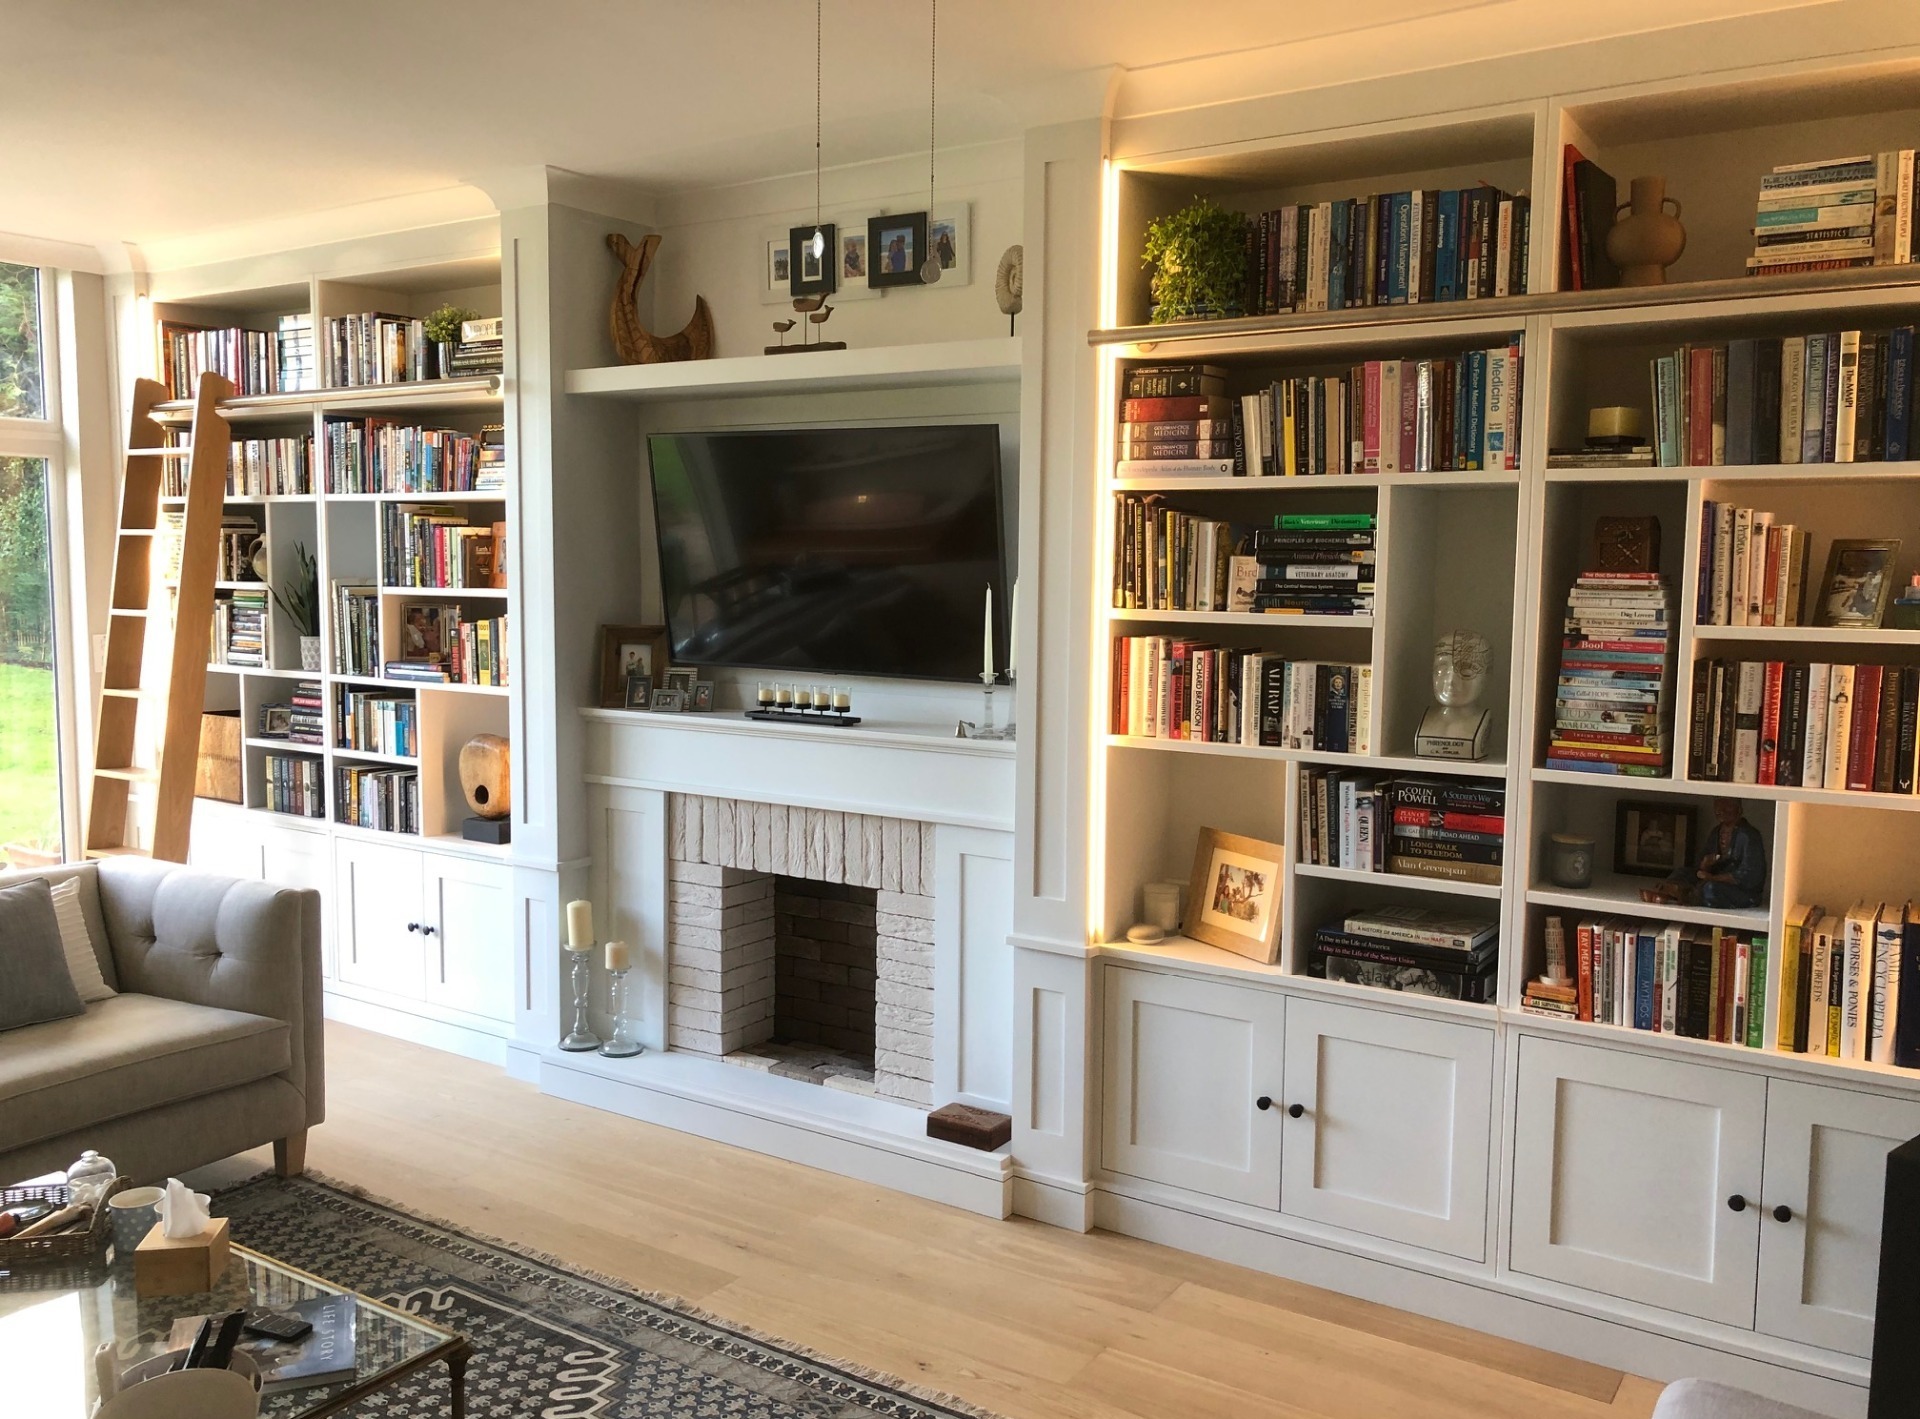 In-frame bookcases